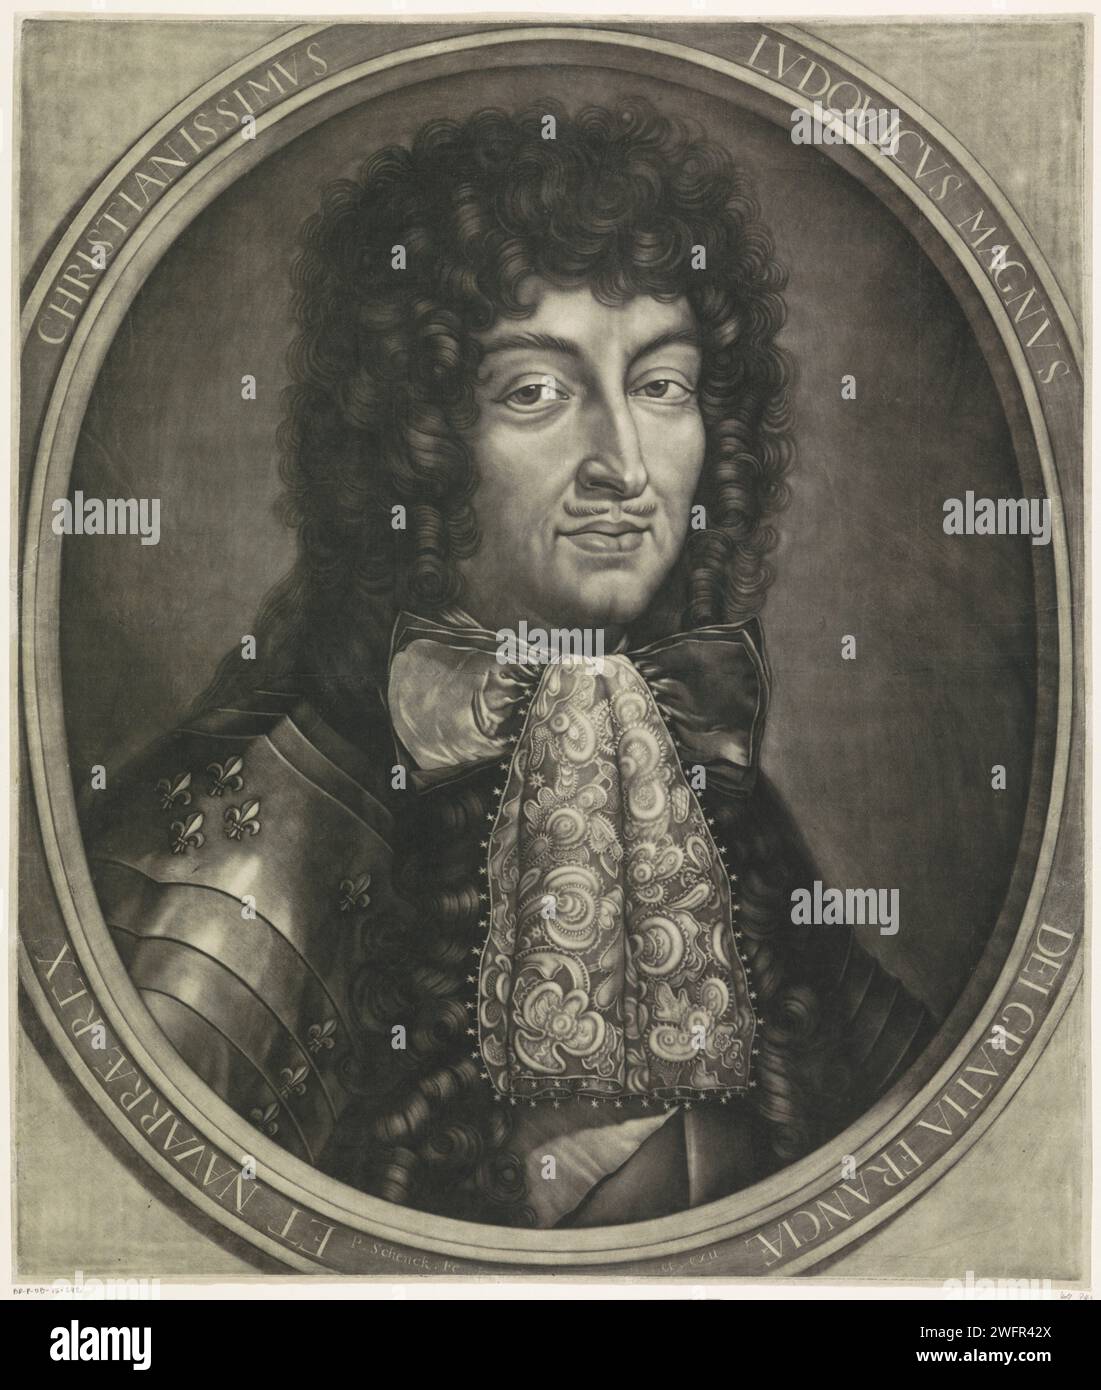 Portrait of Louis XIV, King of France, Pieter Schenk (I), 1670 - 1713 print Louis XIV, king of France, in armor, decorated with French lilies and a lace collar. Leipzig paper  wig Stock Photo